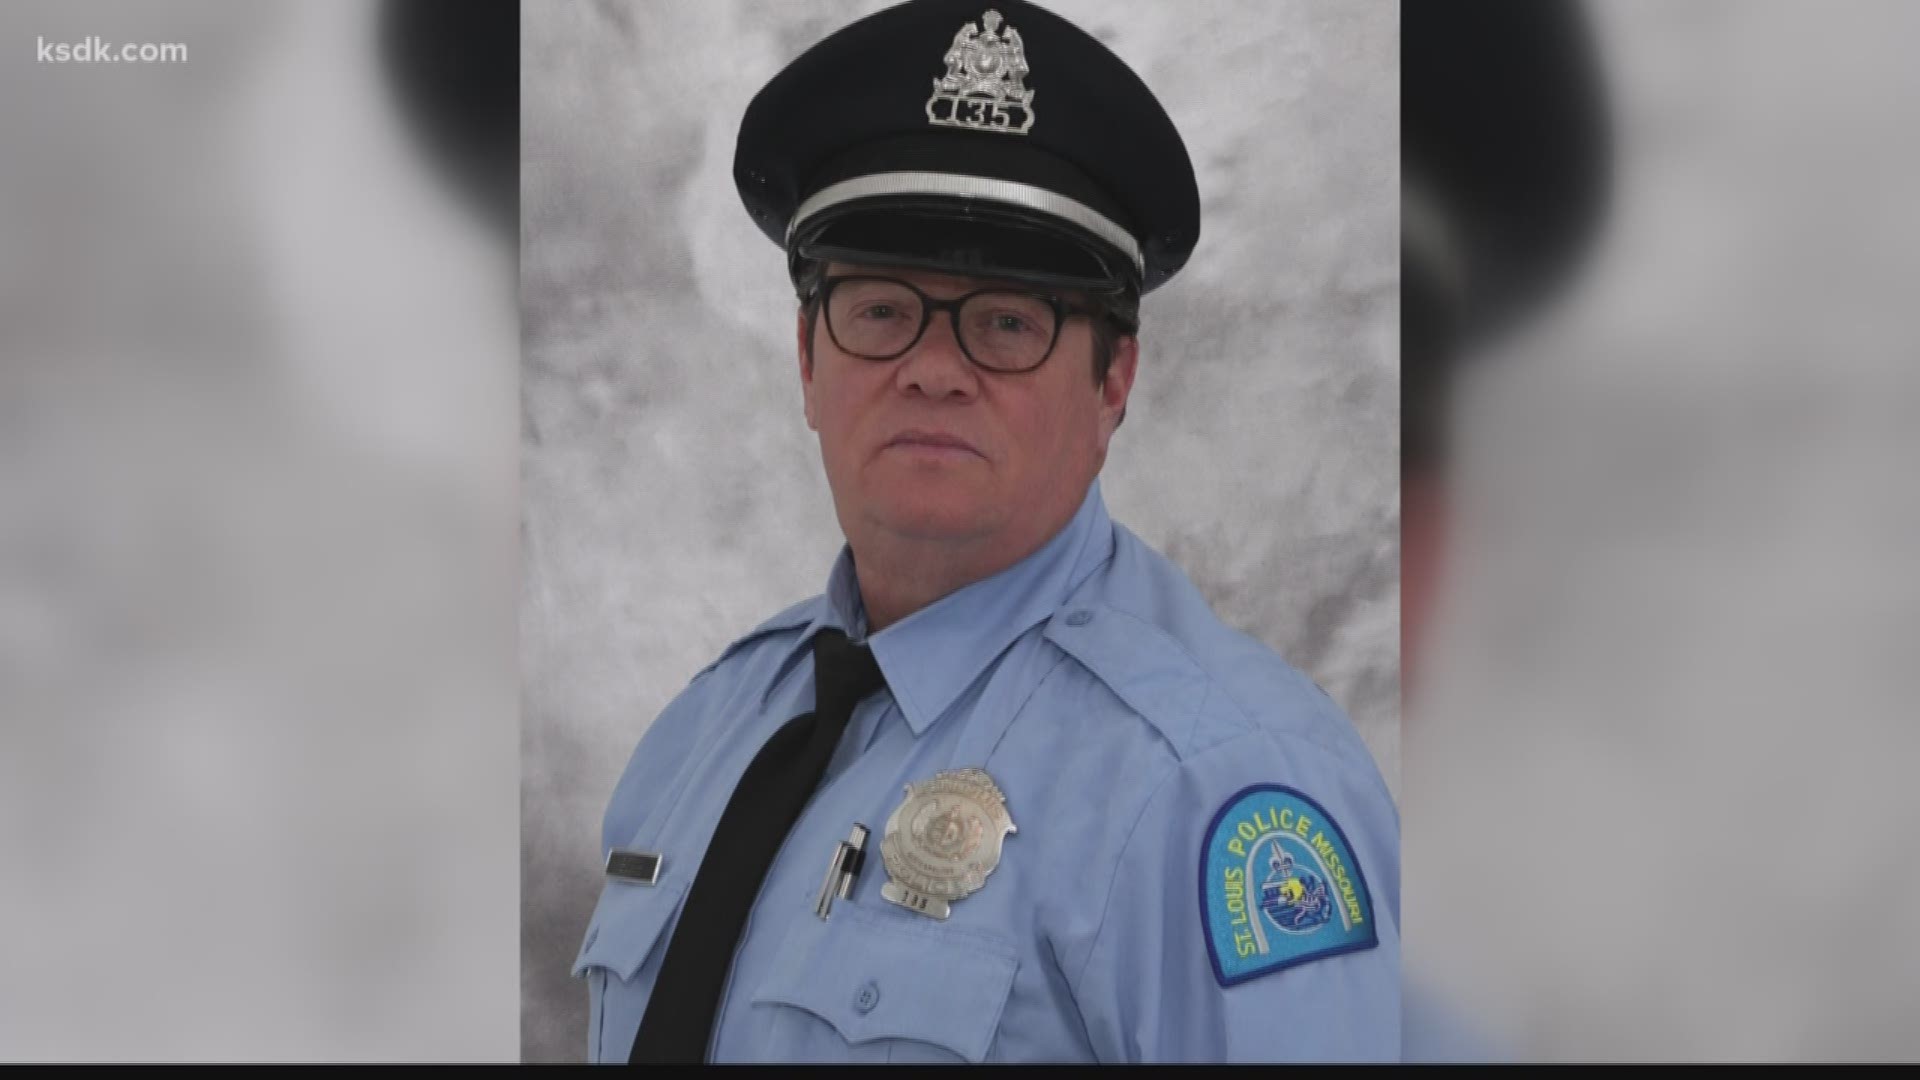 Officer George Boggs died when he drove his van the wrong direction down Route 367 in North St Louis County last night.